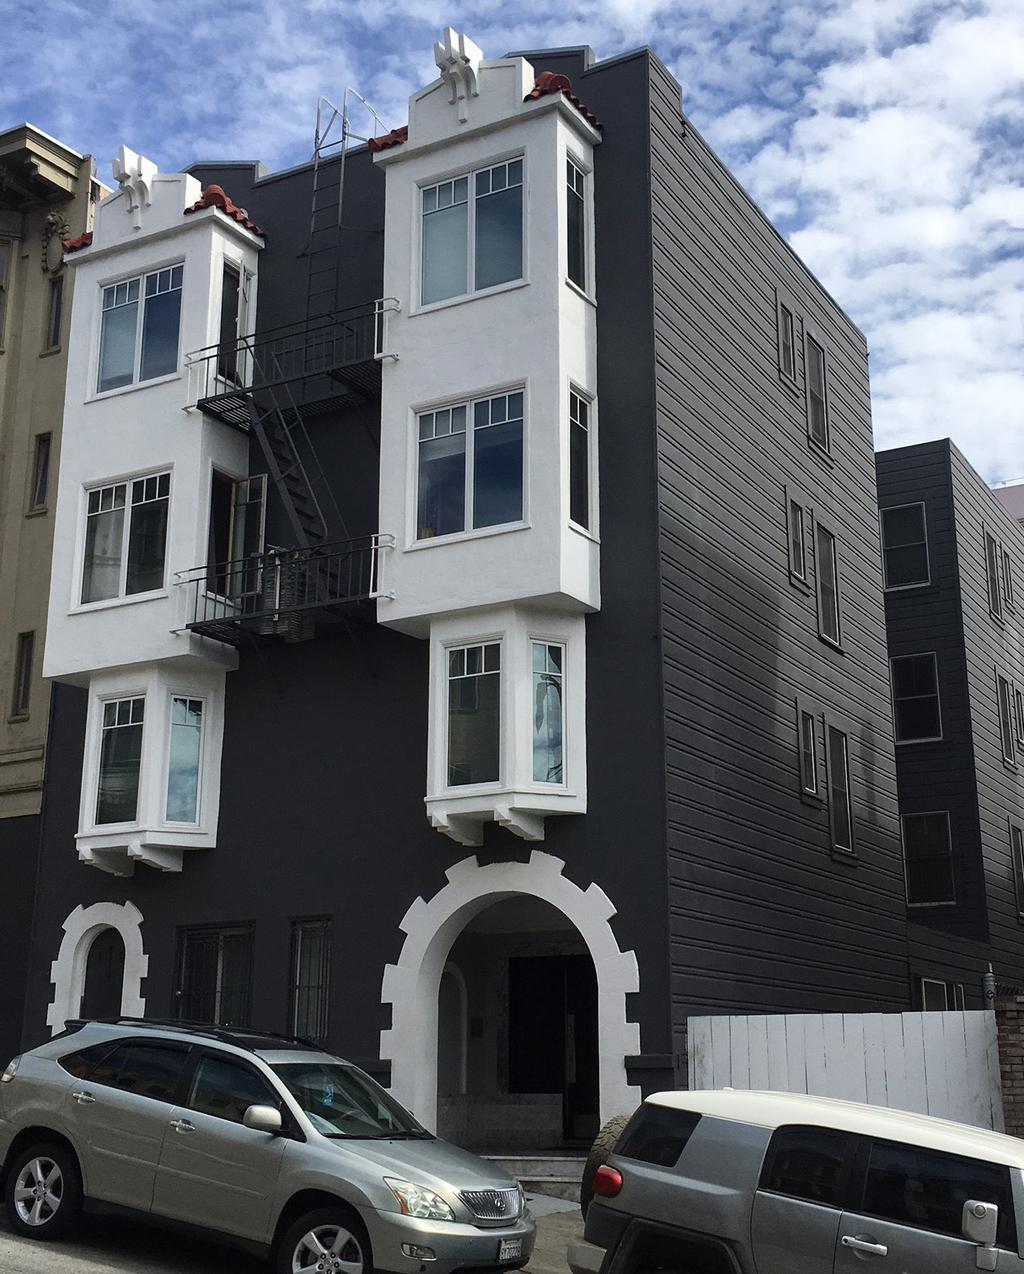 This beautifully and extensively renovated 9 unit apartment building is located in one of the consistently hottest rental neighborhoods of San Francisco.